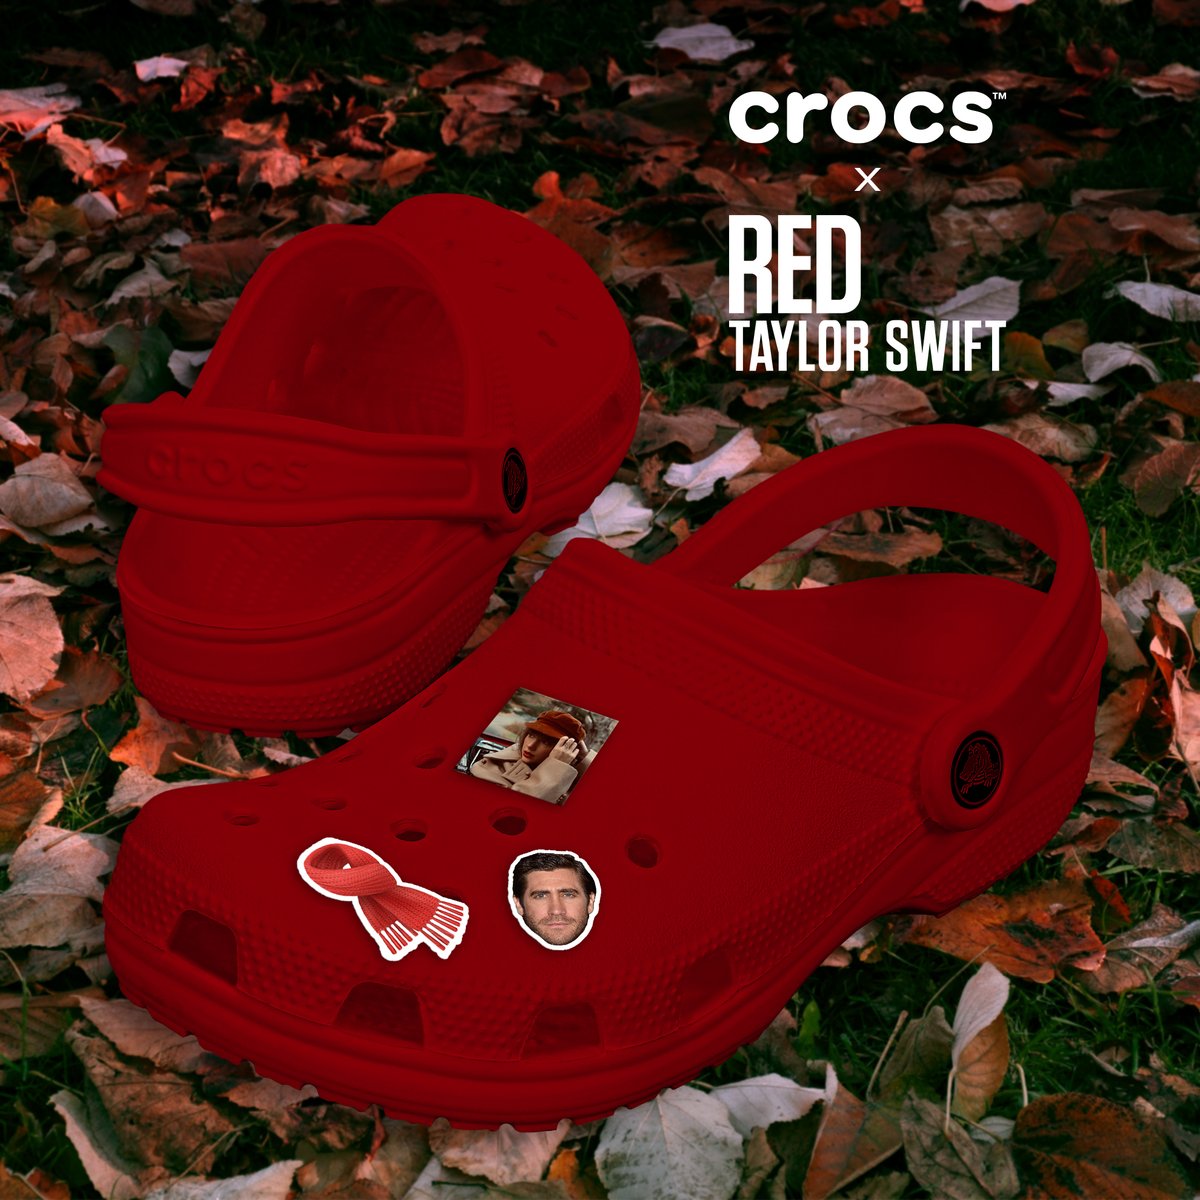 Our design team have their take on some pop culture @Crocs👟 Fan of @netflix Tiger King? We have some themed crocs for all you 'cool cats and kittens' out there🐅 Are you a swifty? We have a special collaboration with @taylorswift13 for her comeback re-release 'Red' album 🎶